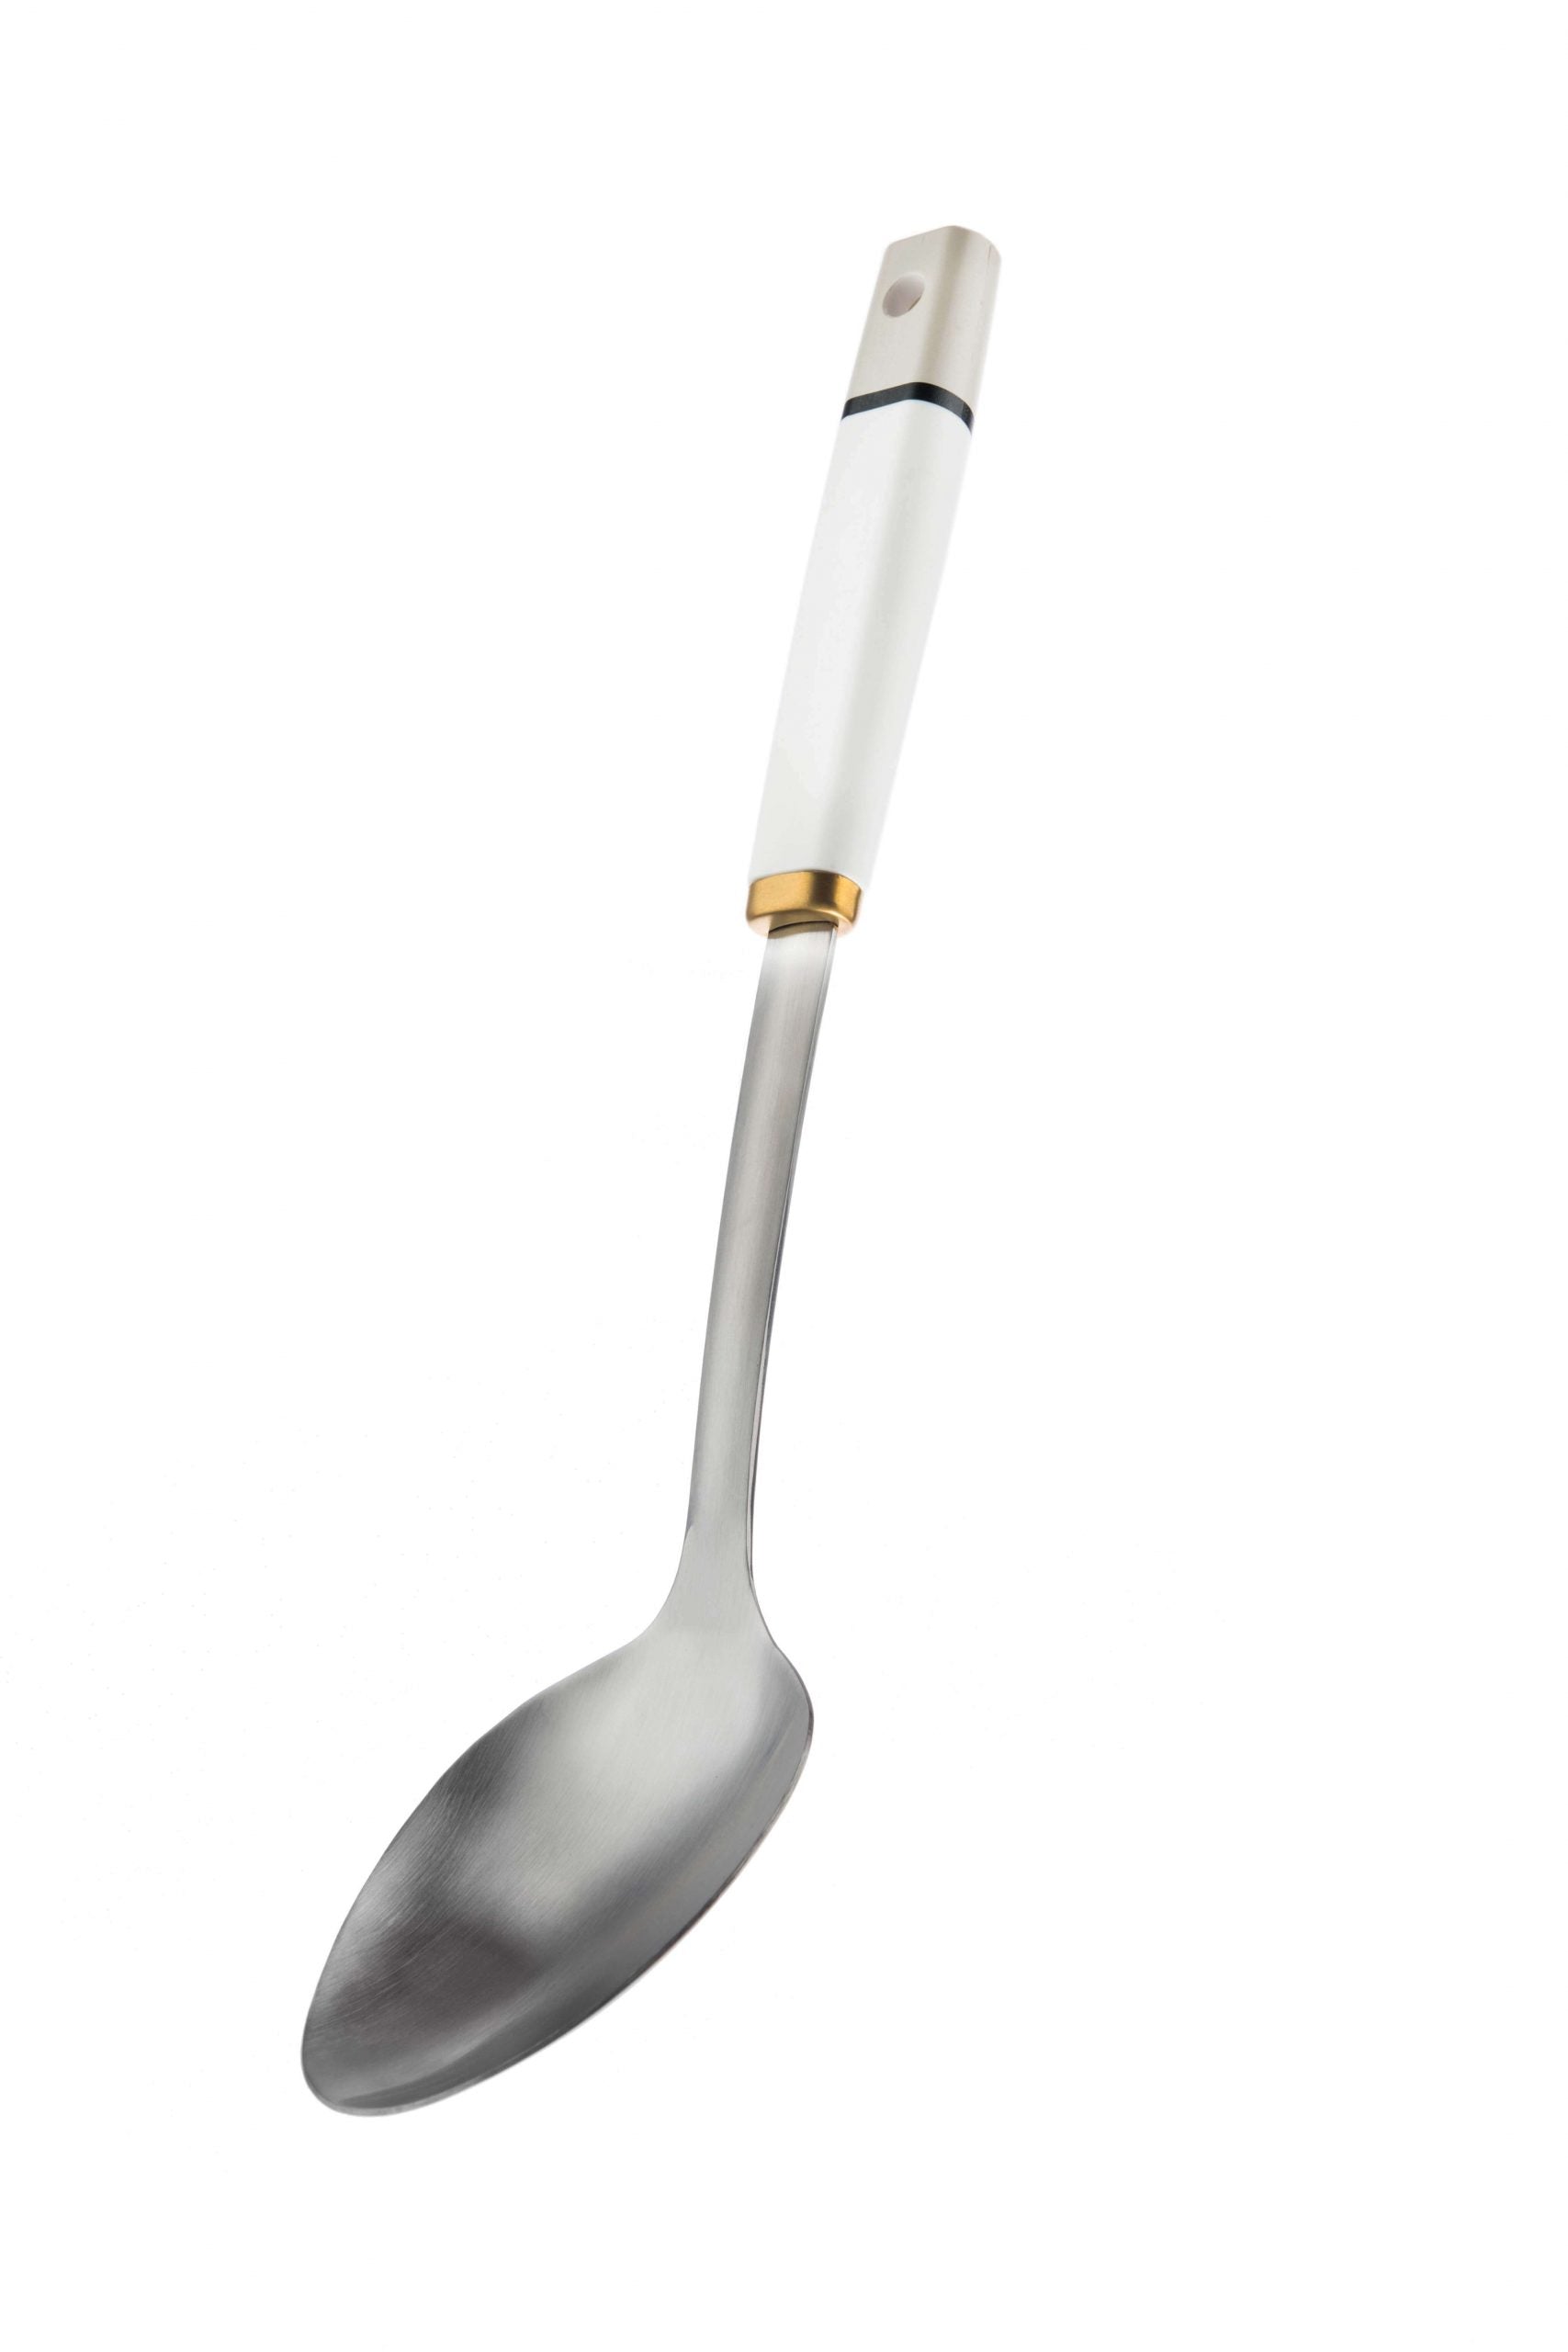 Kitchen Pantry – Stainless Steel Spoon - The Cooks Cupboard Ltd